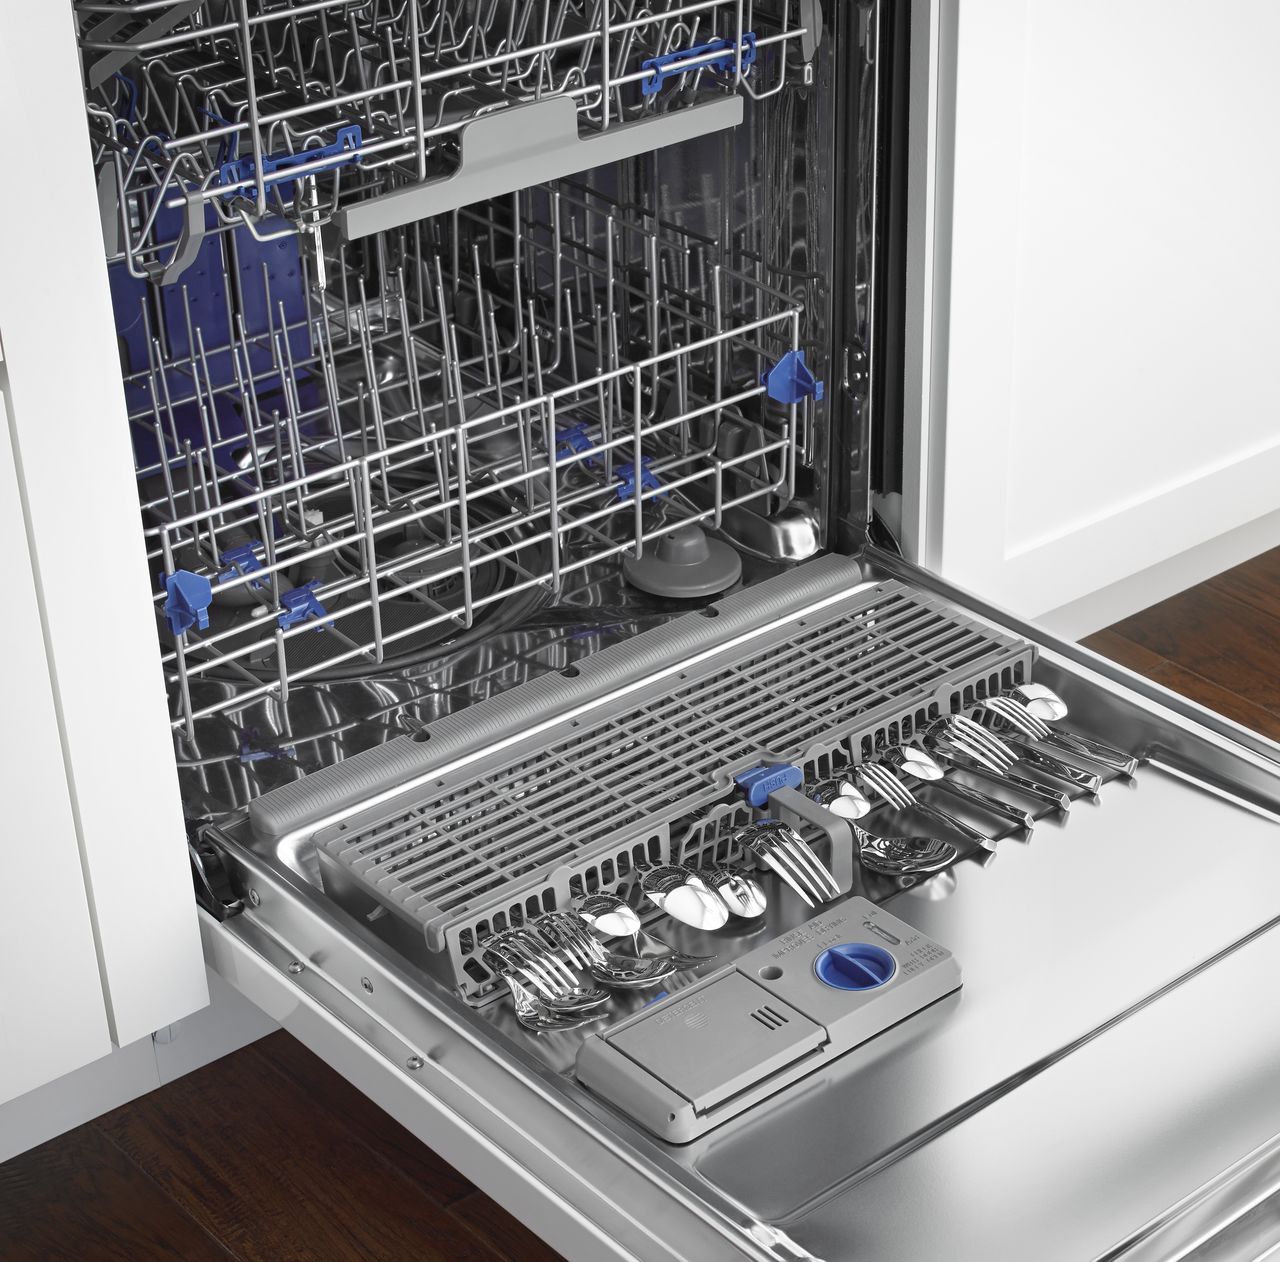 How To Tell How Old A Dishwasher Is Where to Find the Model and Serial Number on a Whirlpool Dishwasher -  Flamingo Appliance Service